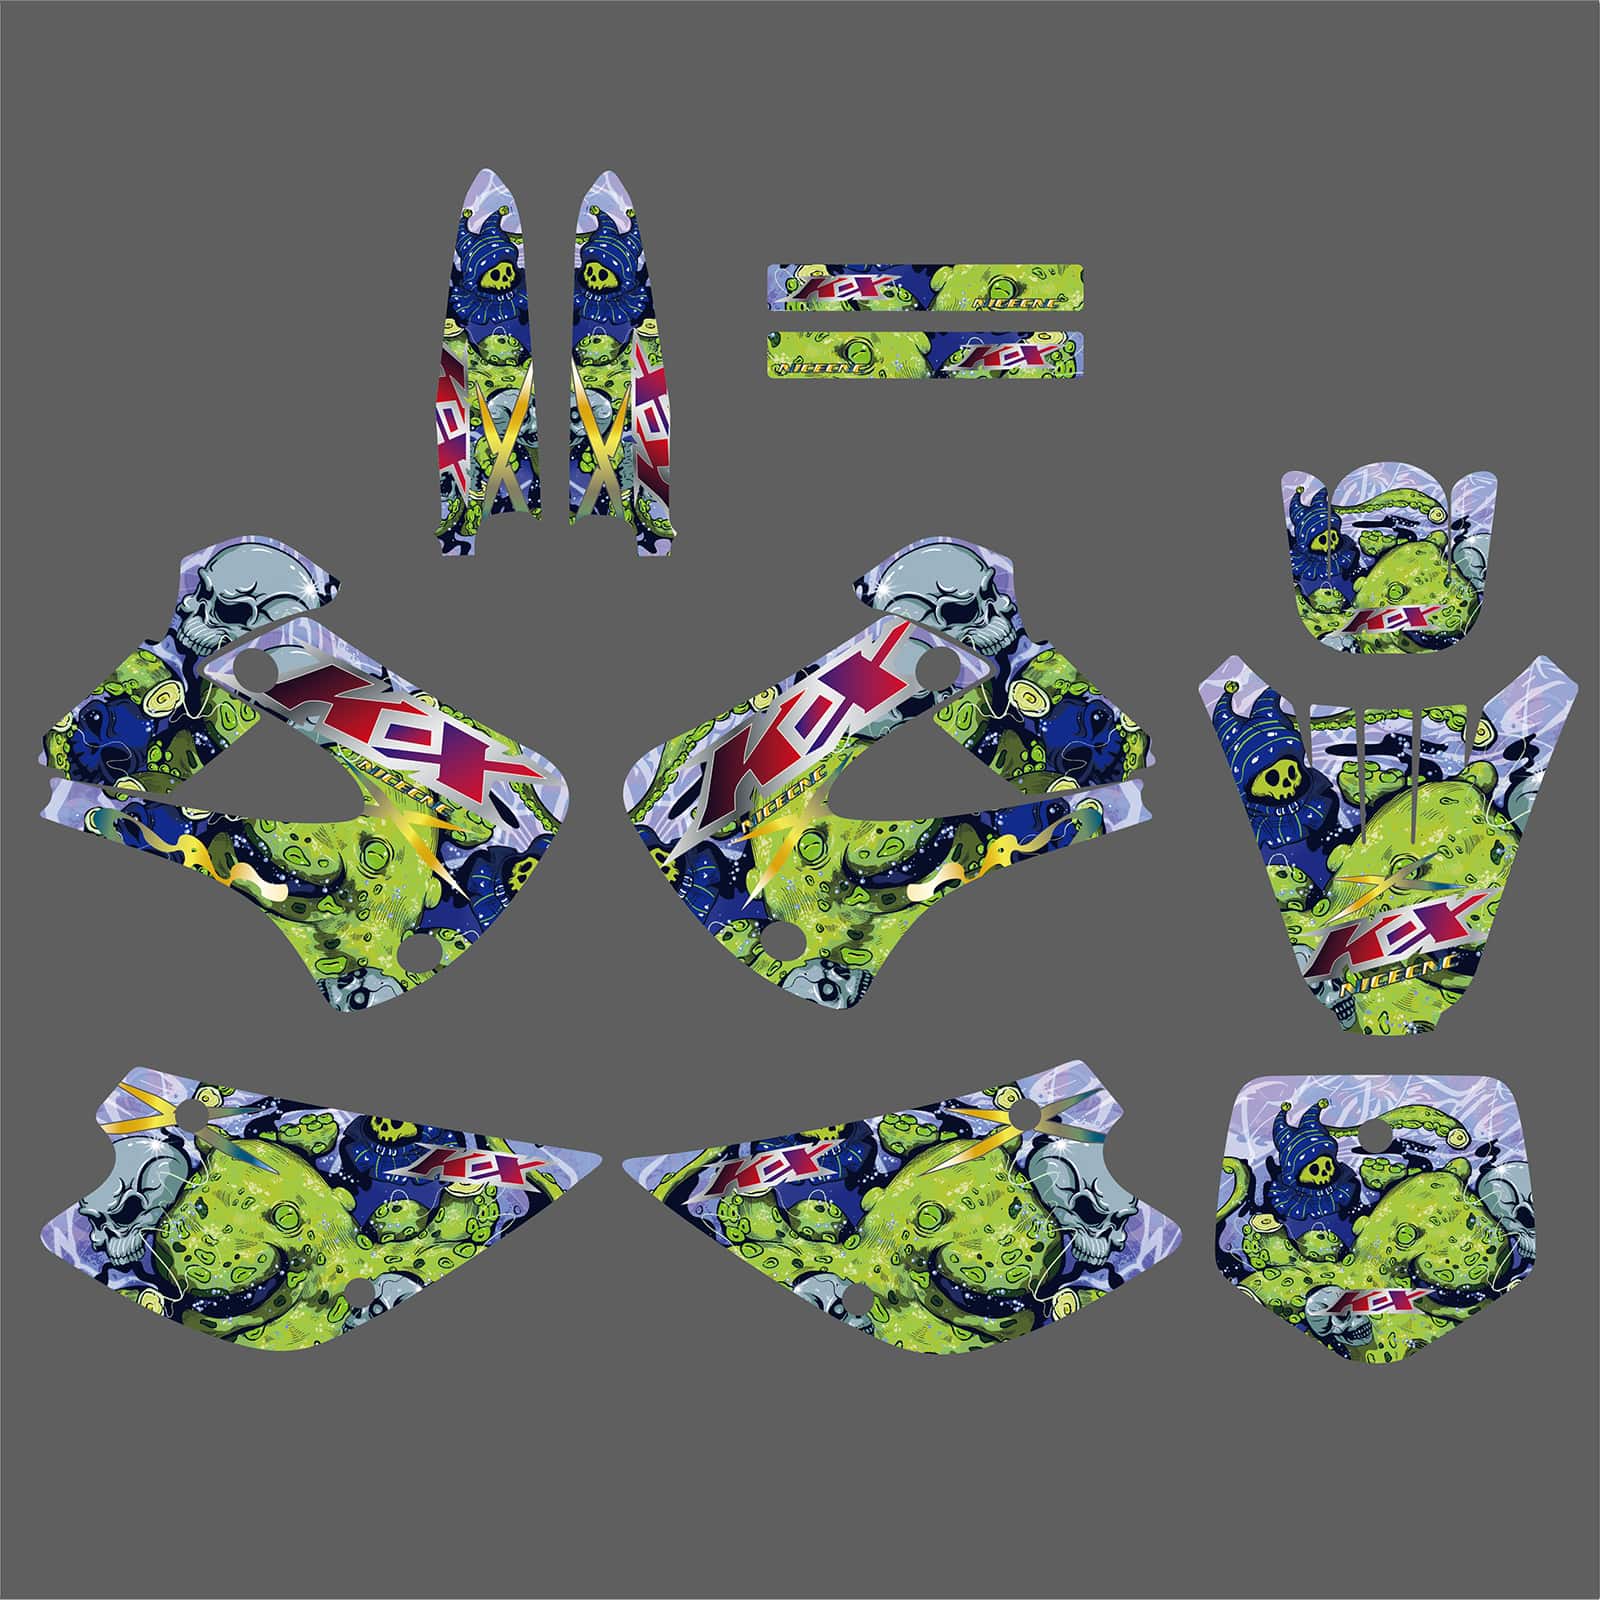 Motorcycle Team Full Graphics Background Sticker Decal Kits For KAWASAKI KX85/KX100 1998-2013